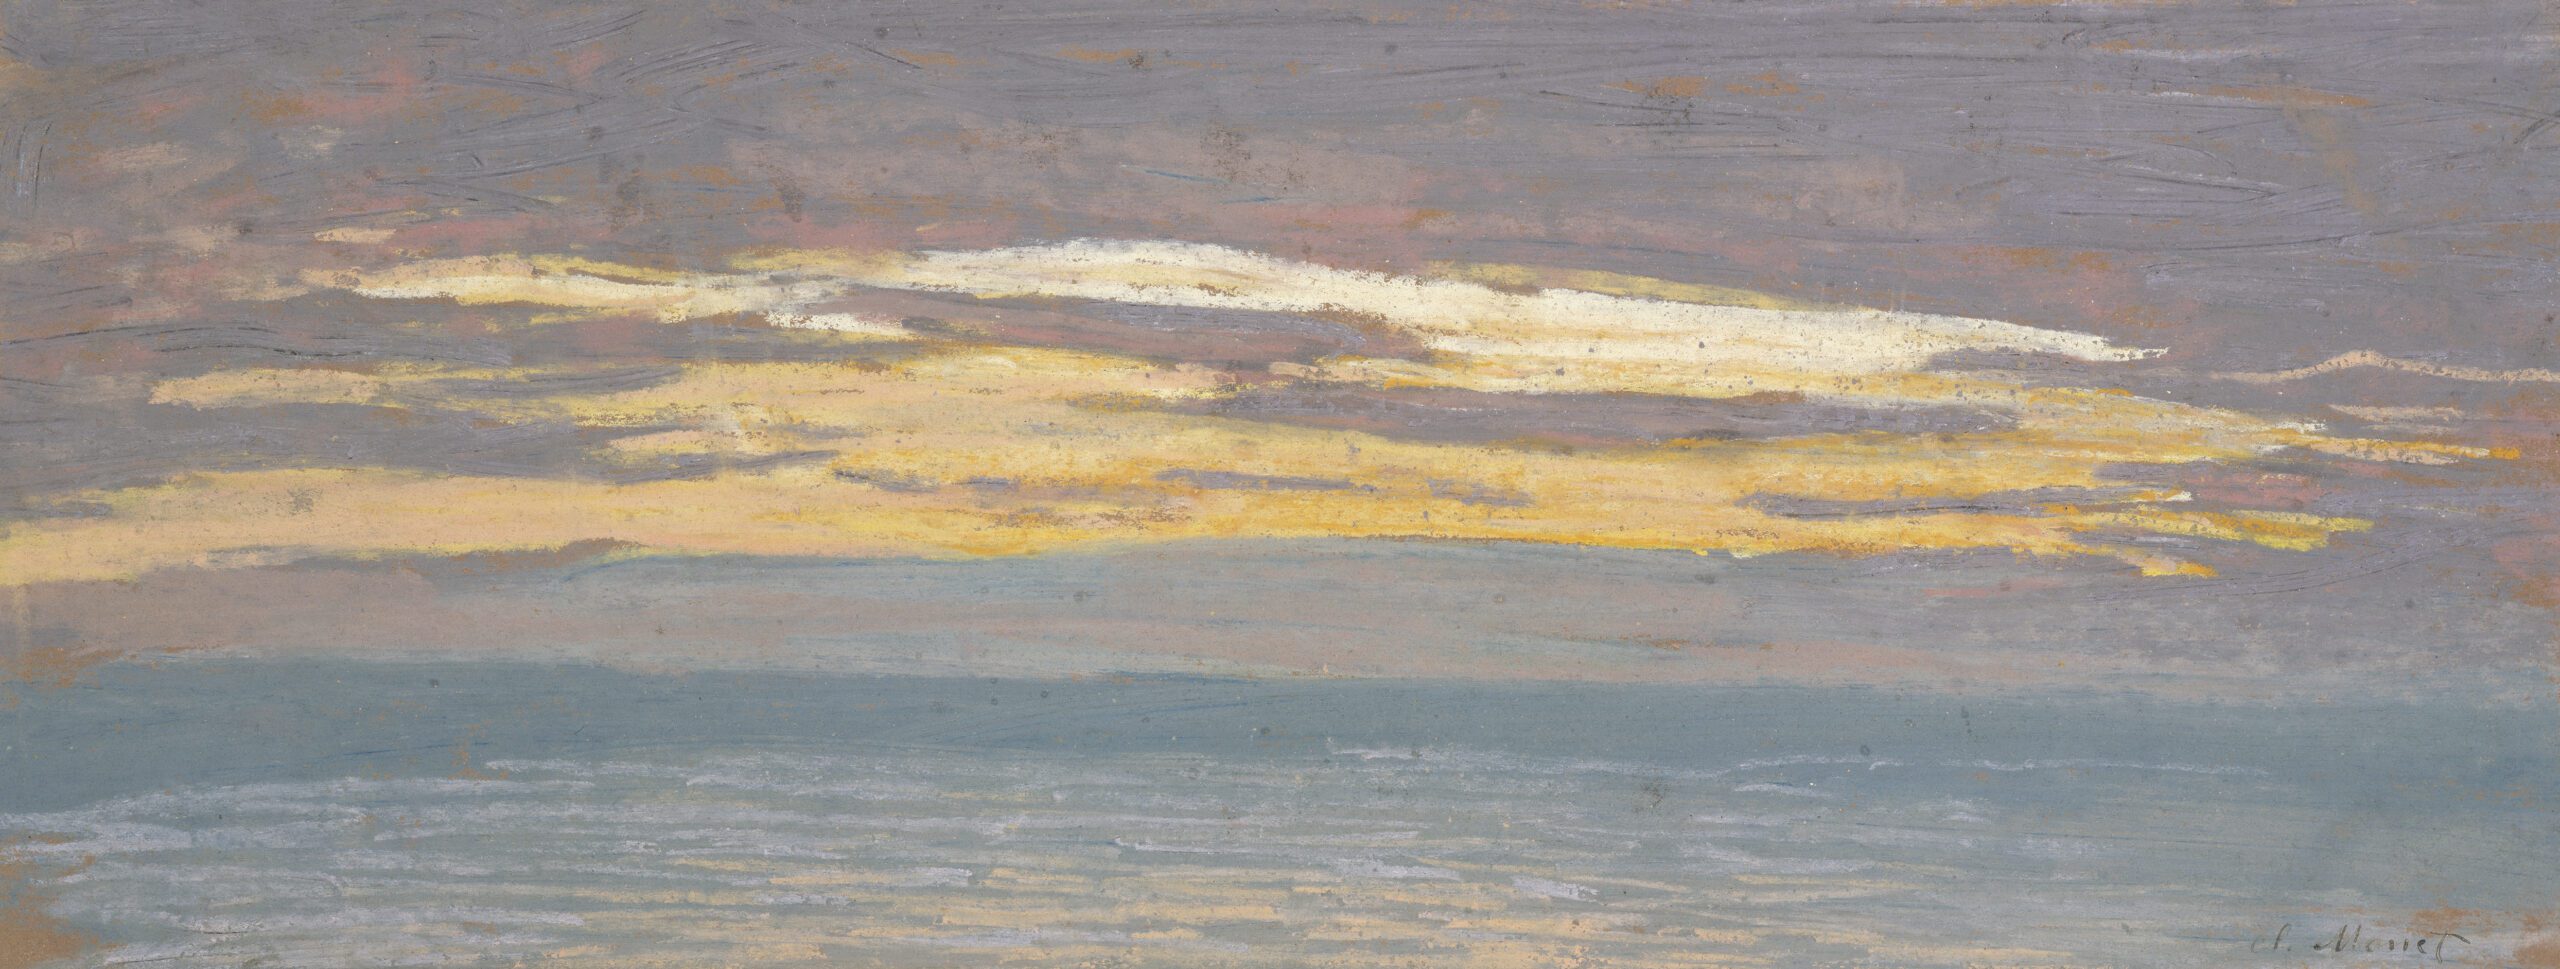 Claude Monet, View of the Sea at Sunset, about 1862 Pastel on paper, 15.3 x 40 cm Bequest of William P. Blake in memory of his sister, Anne Dehon Blake © Museum of Fine Arts, Boston (1)